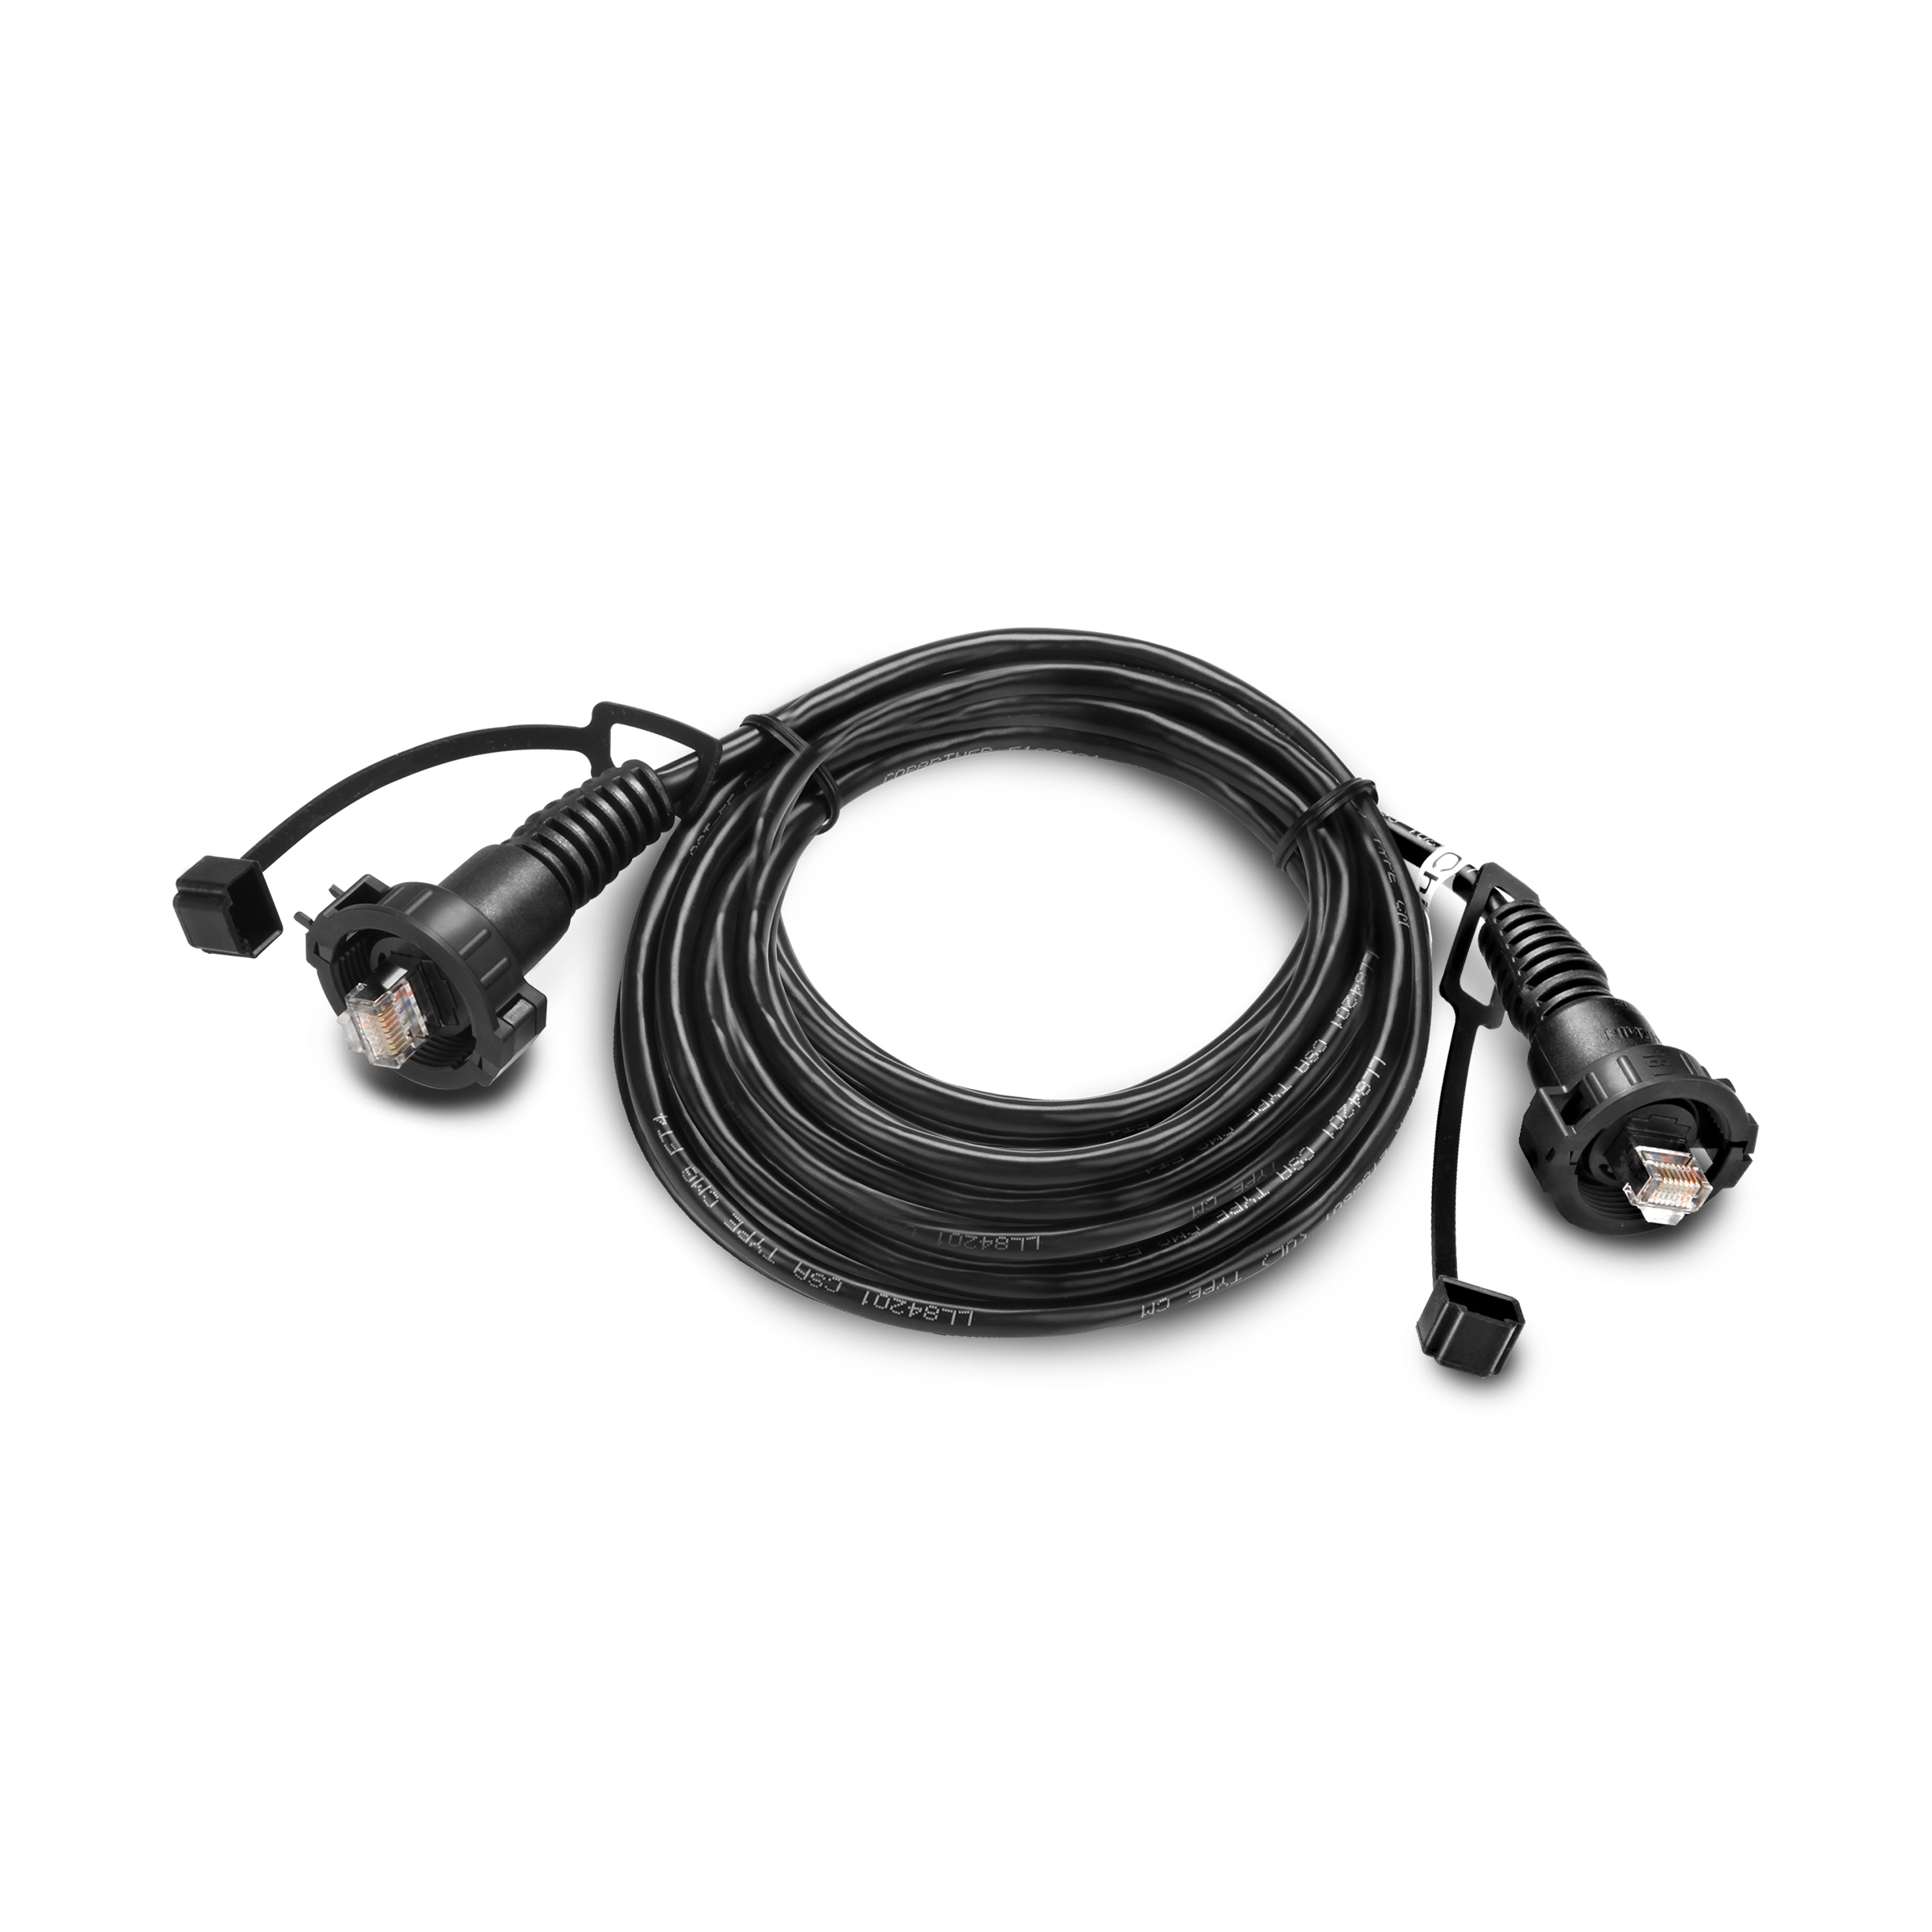 Garmin Marine Network Cable - 40ft